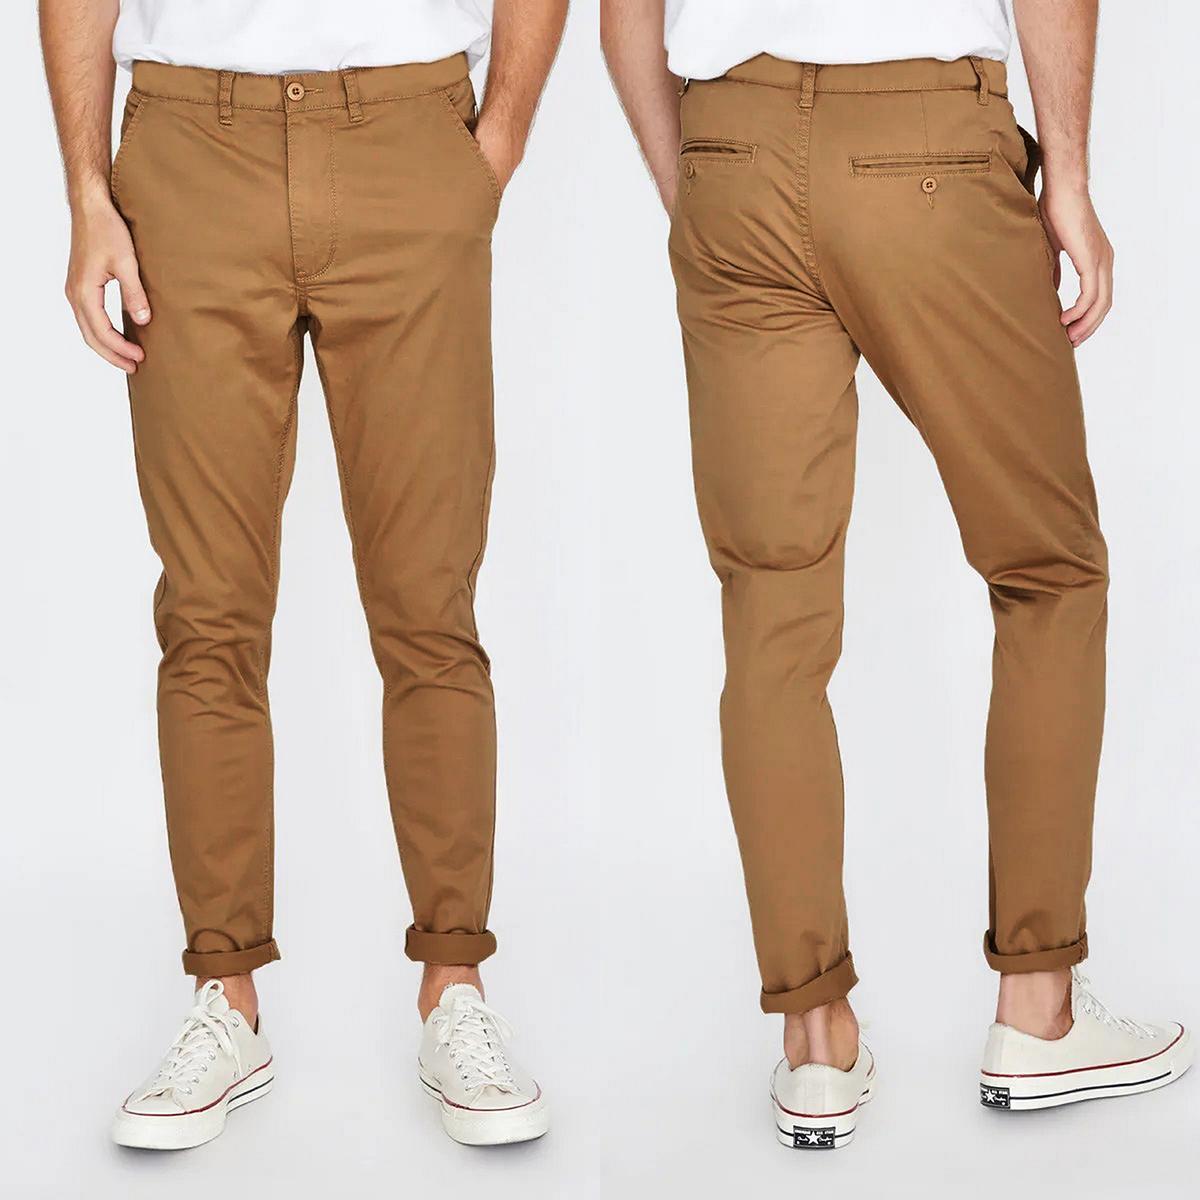 Men's Cotton Chino Stretch Slim Fit Pants Skinny Casual Buniness Skinny Trousers - Khaki, 28